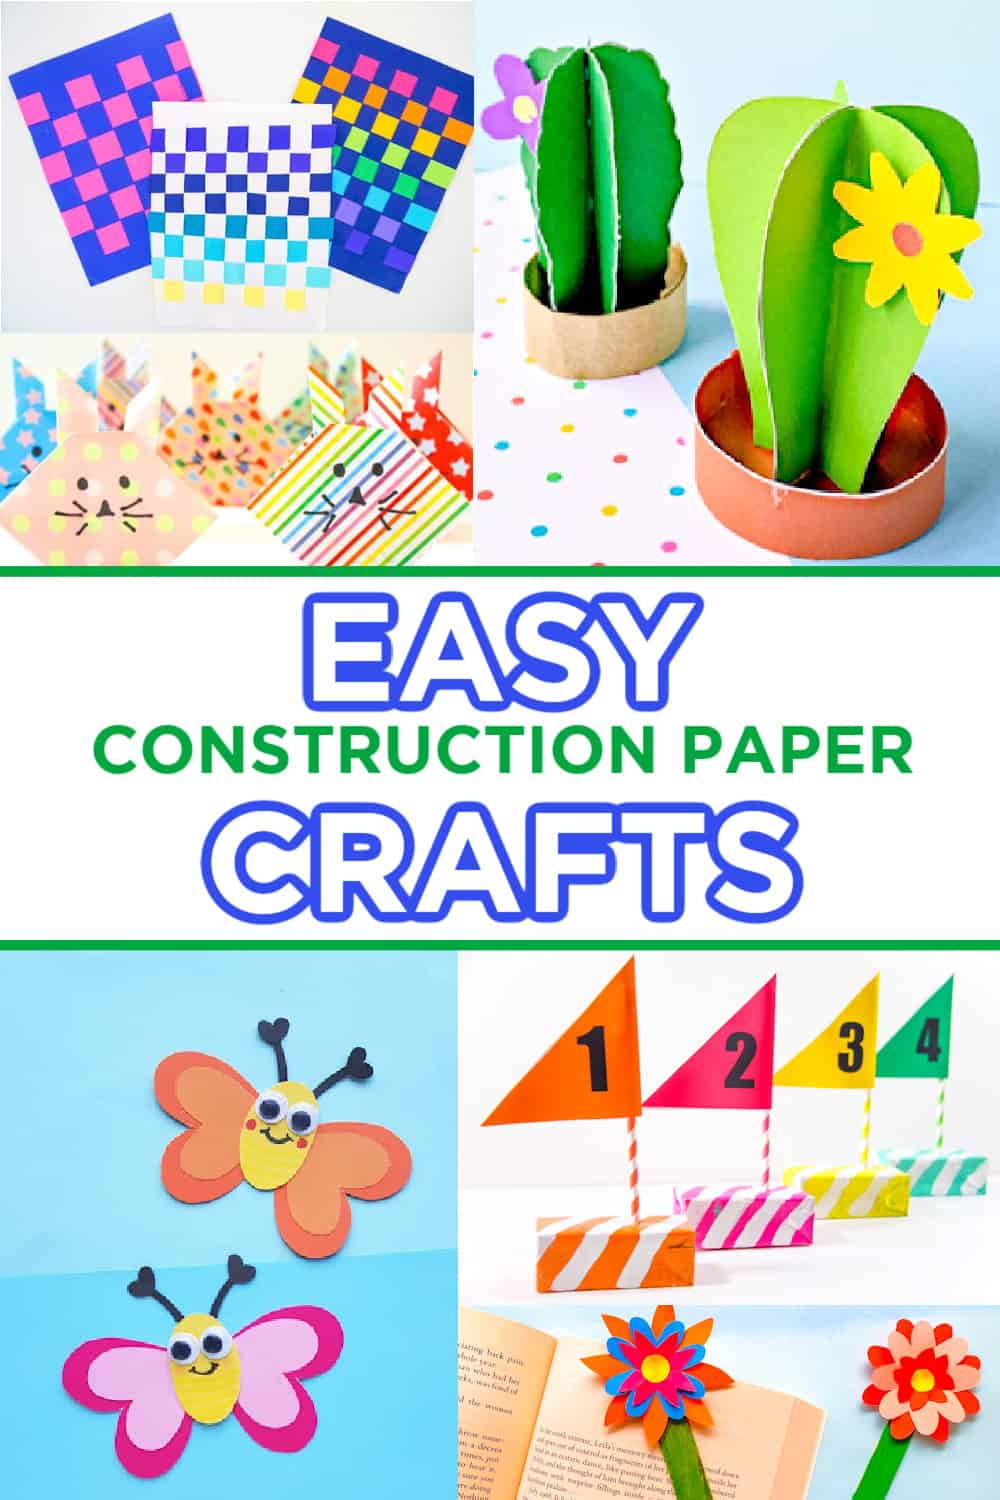 https://www.madewithhappy.com/wp-content/uploads/construction-paper-crafts-for-kids.jpg